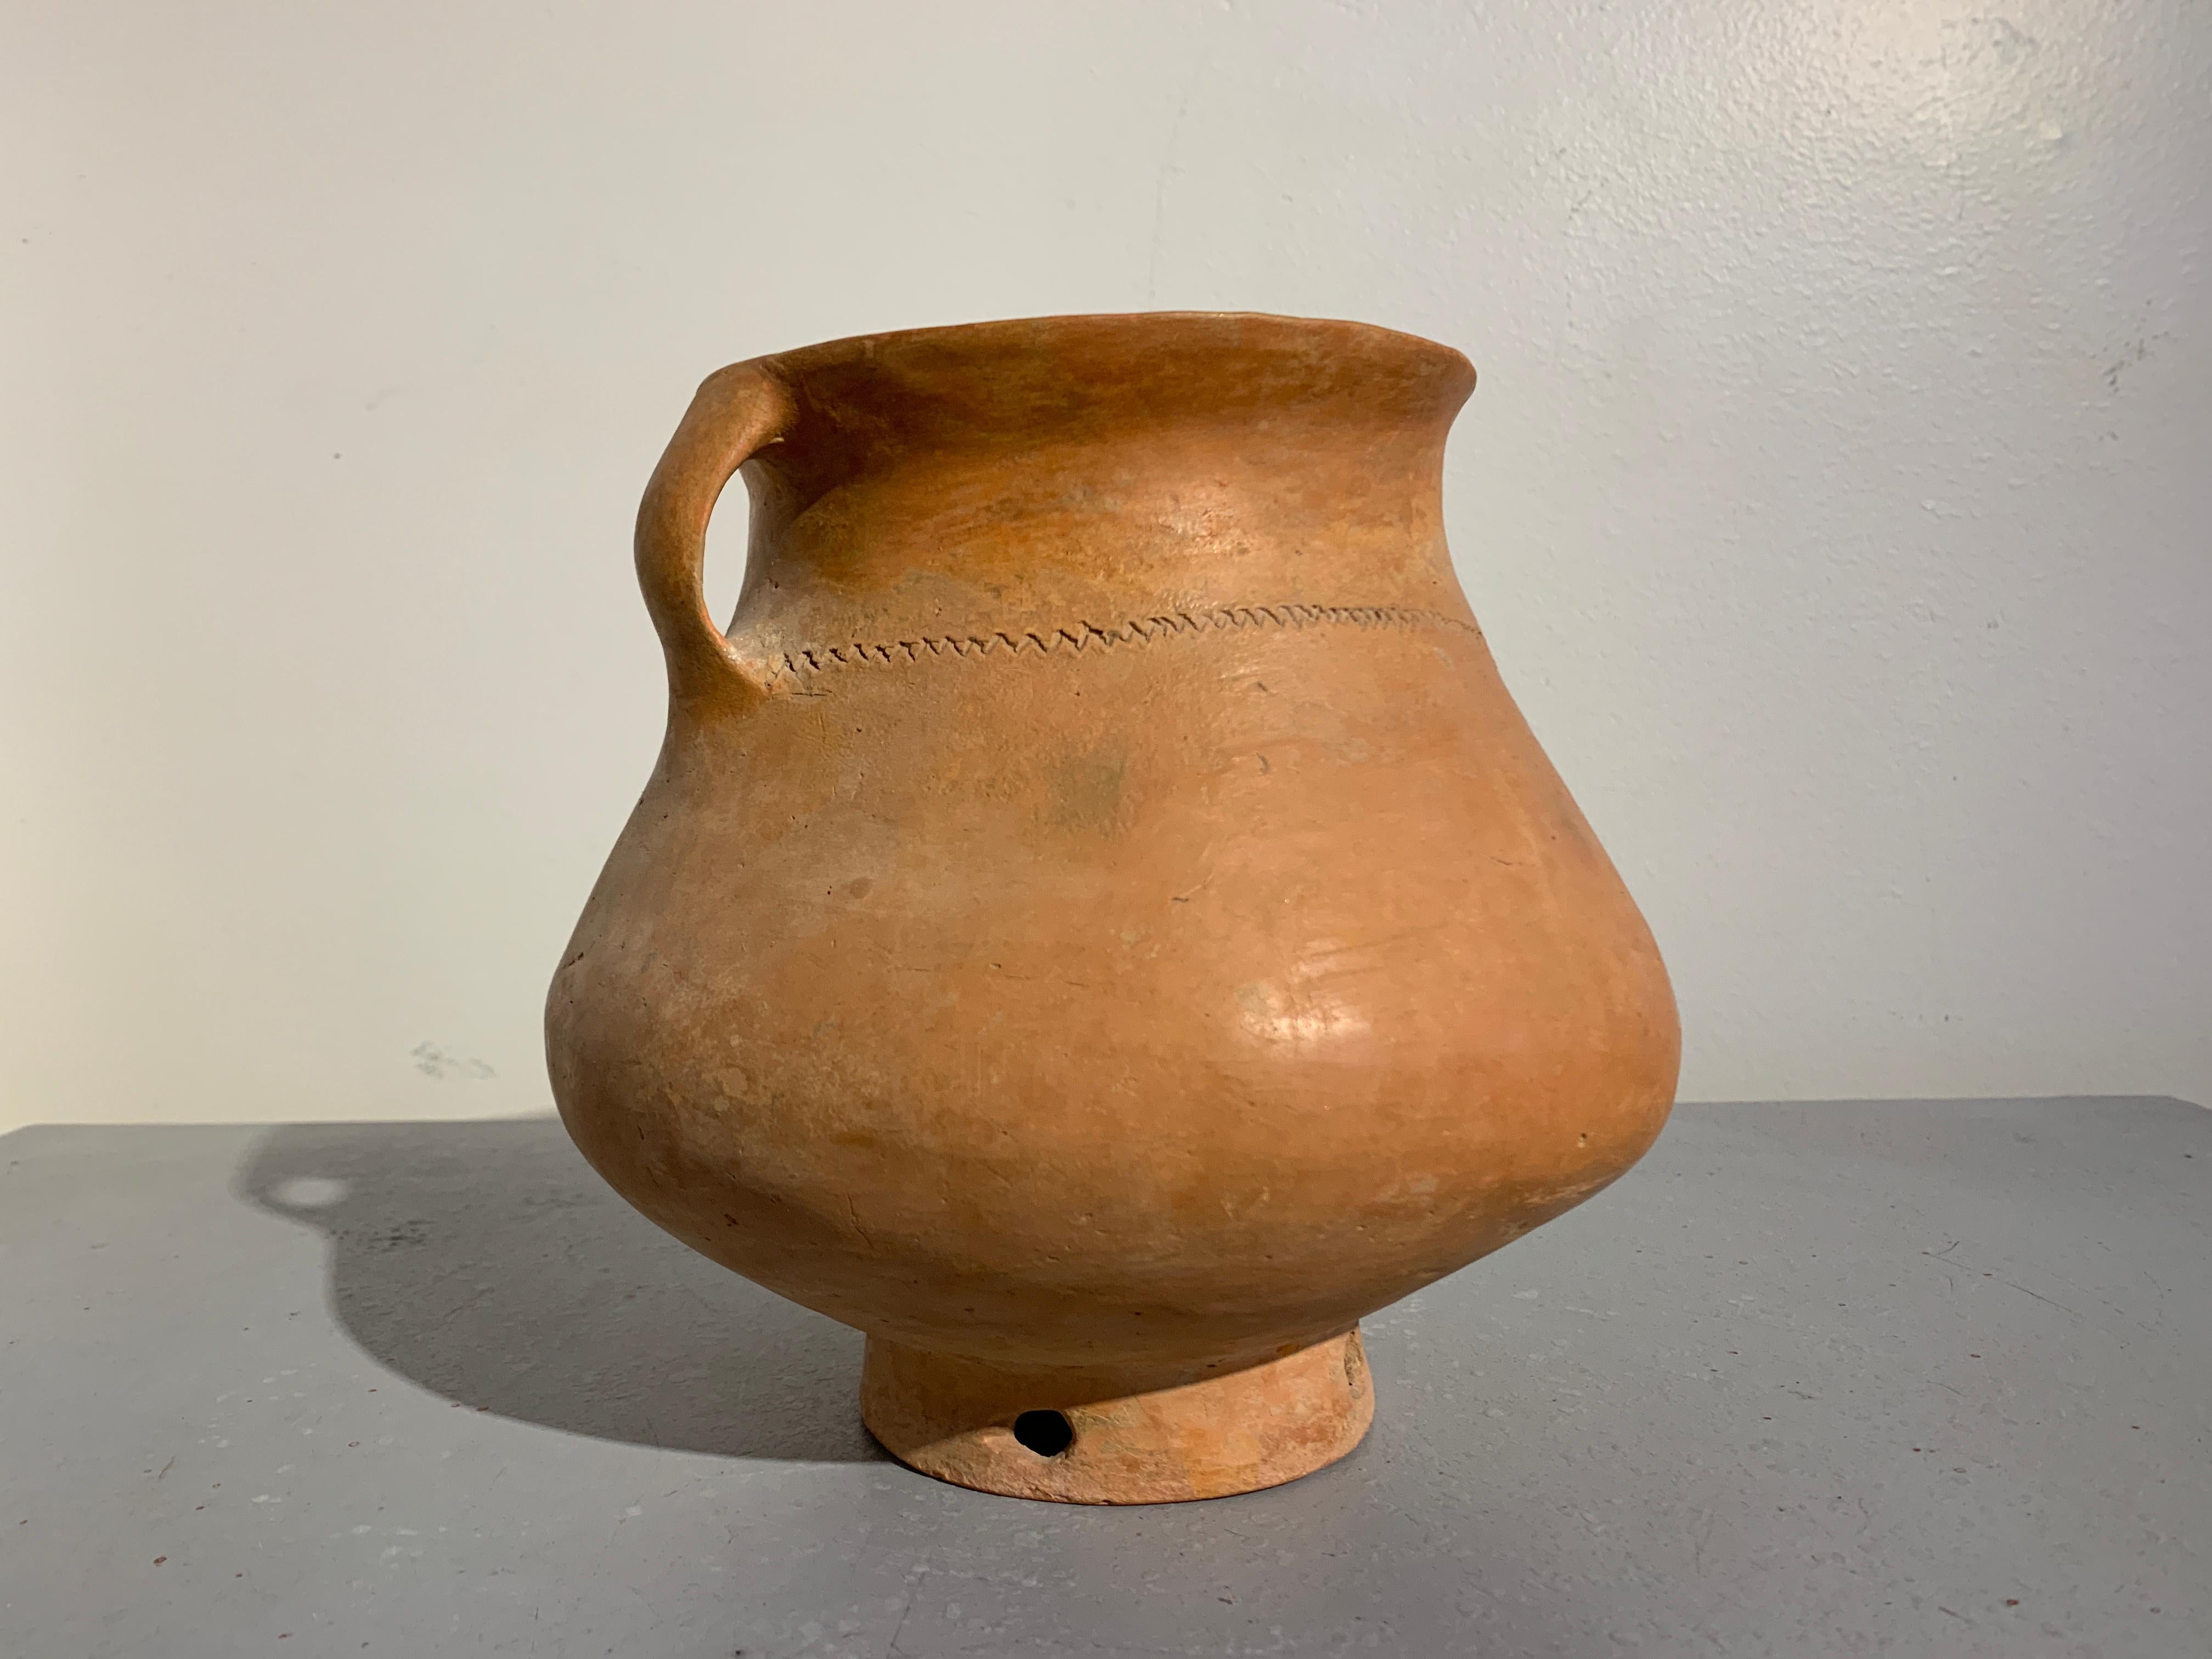 18th Century and Earlier Chinese Neolithic Qijia Culture Red Pottery Vessel, 2200 BC - 1600 BC, China For Sale